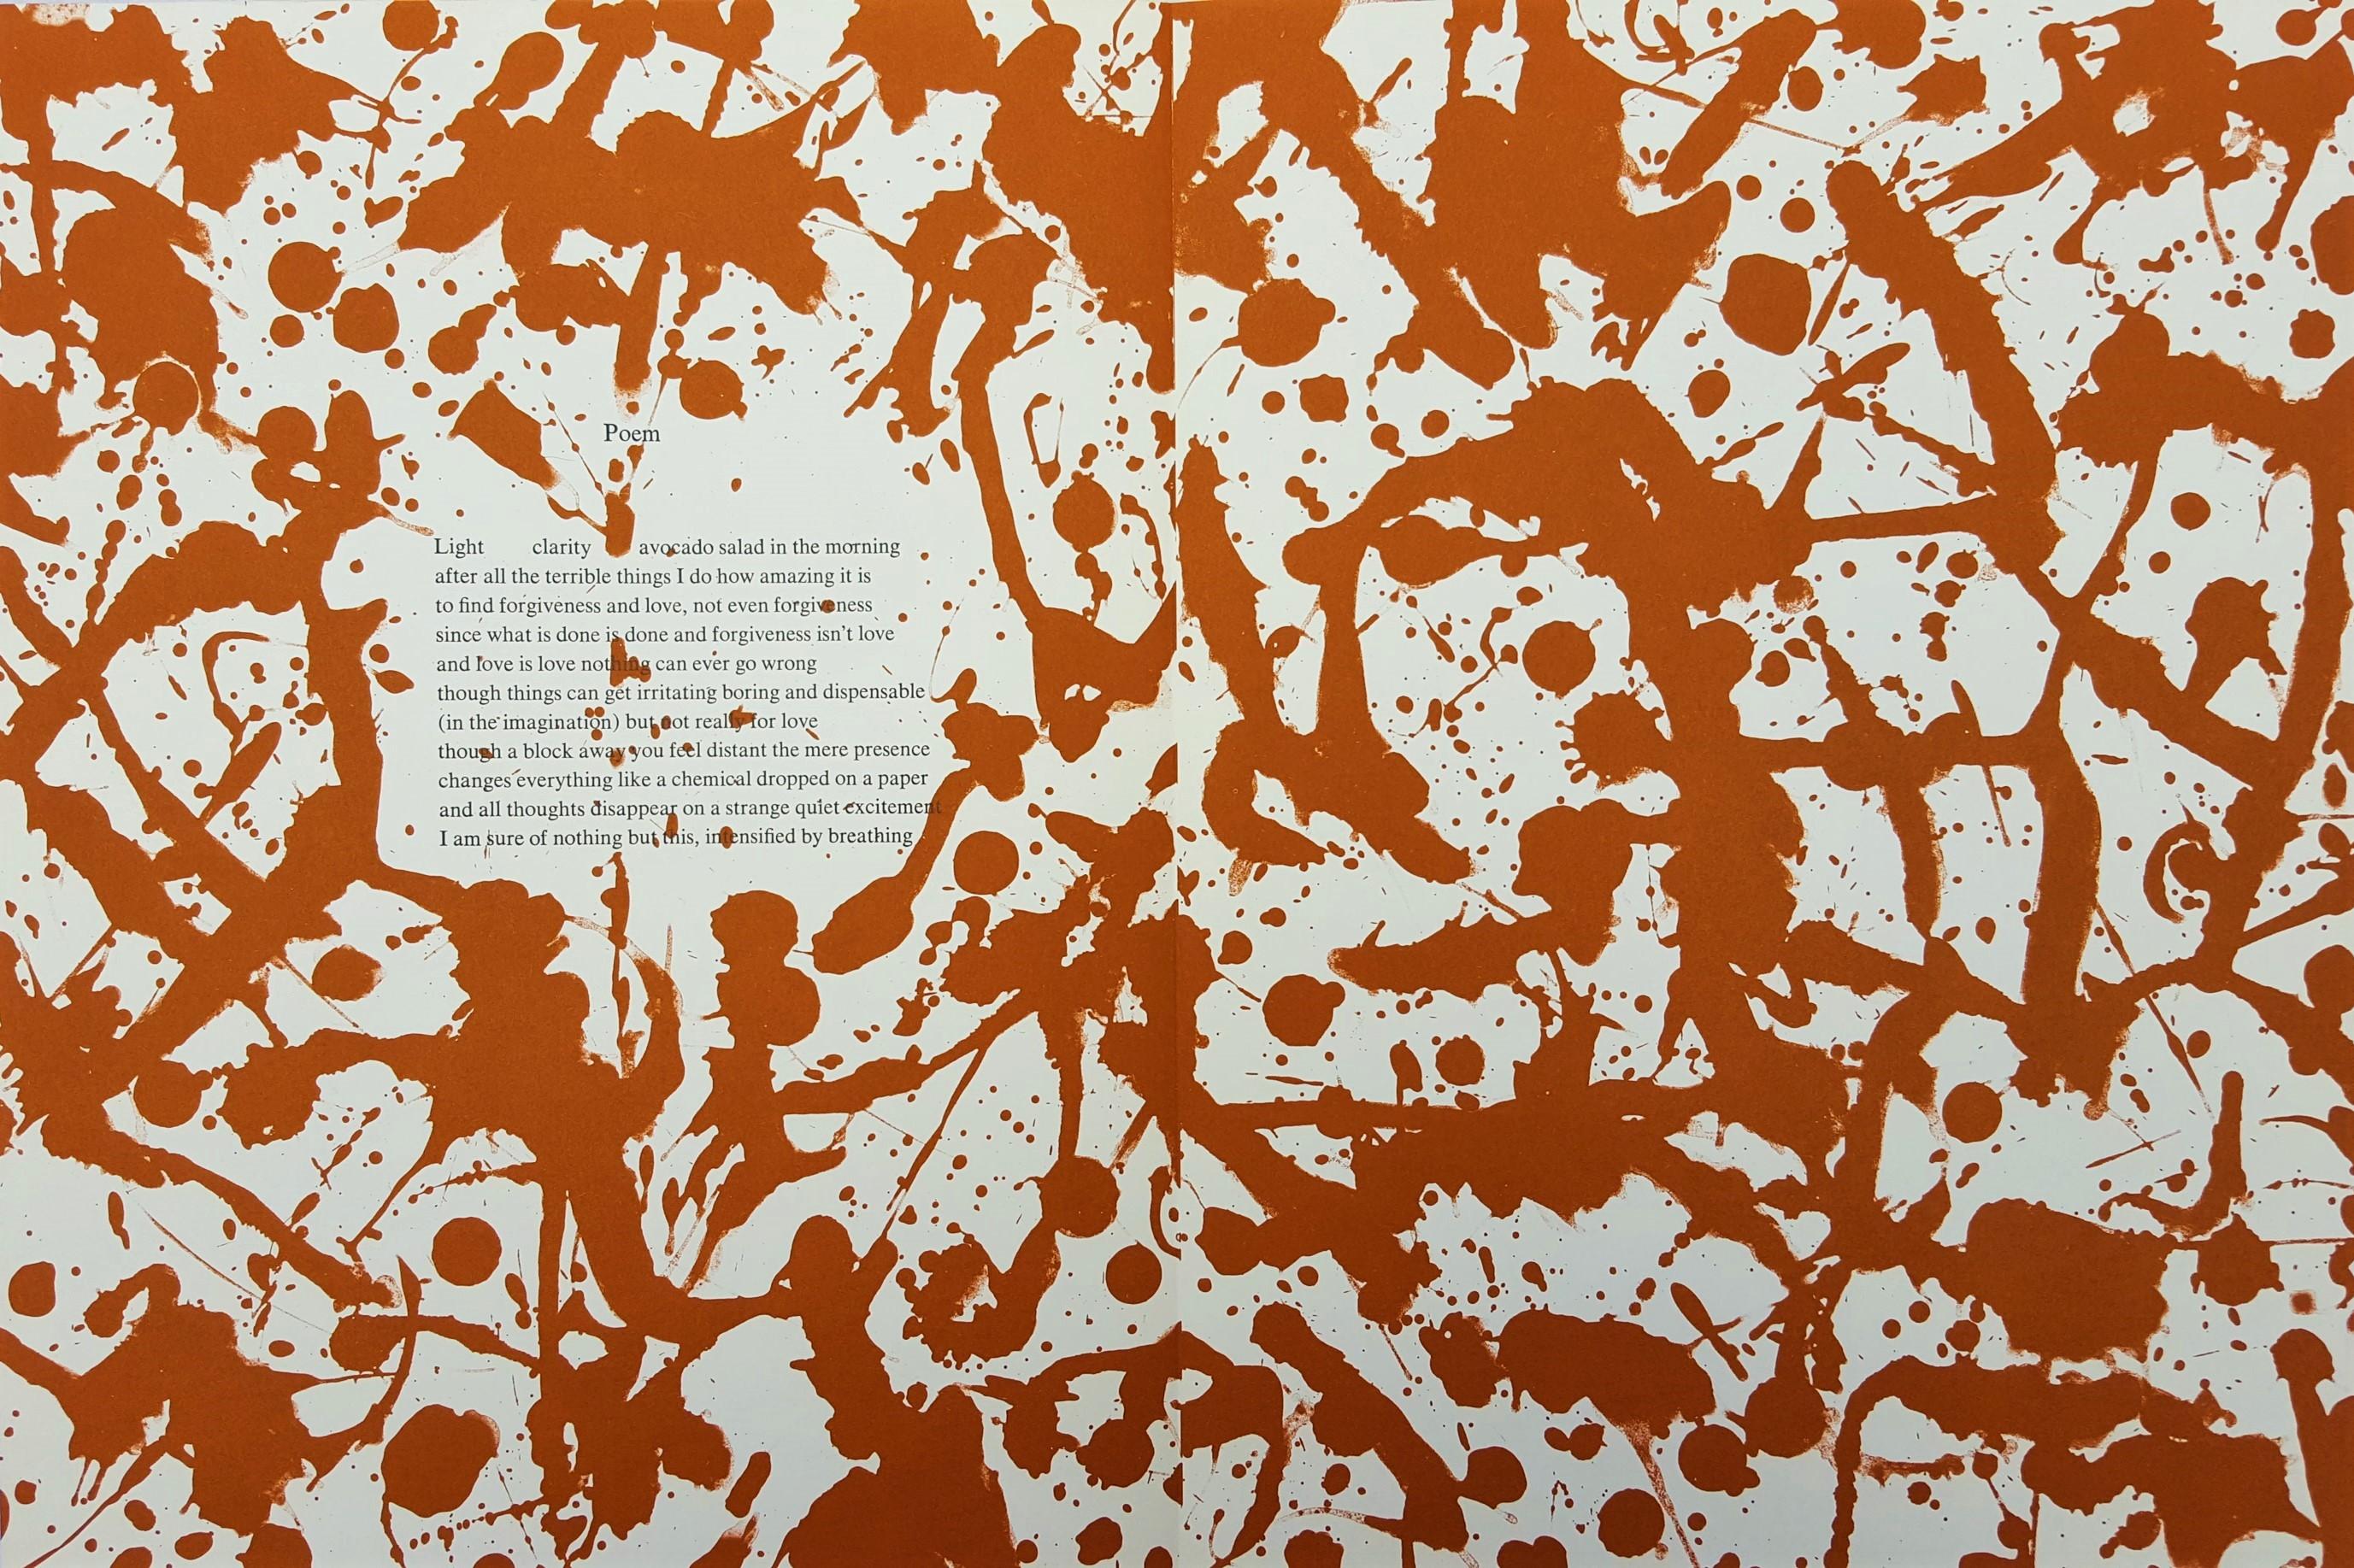 Lee Krasner Abstract Print - Poem /// Abstract Expressionist Female Artist Post-War NY Modern Lithograph MoMA